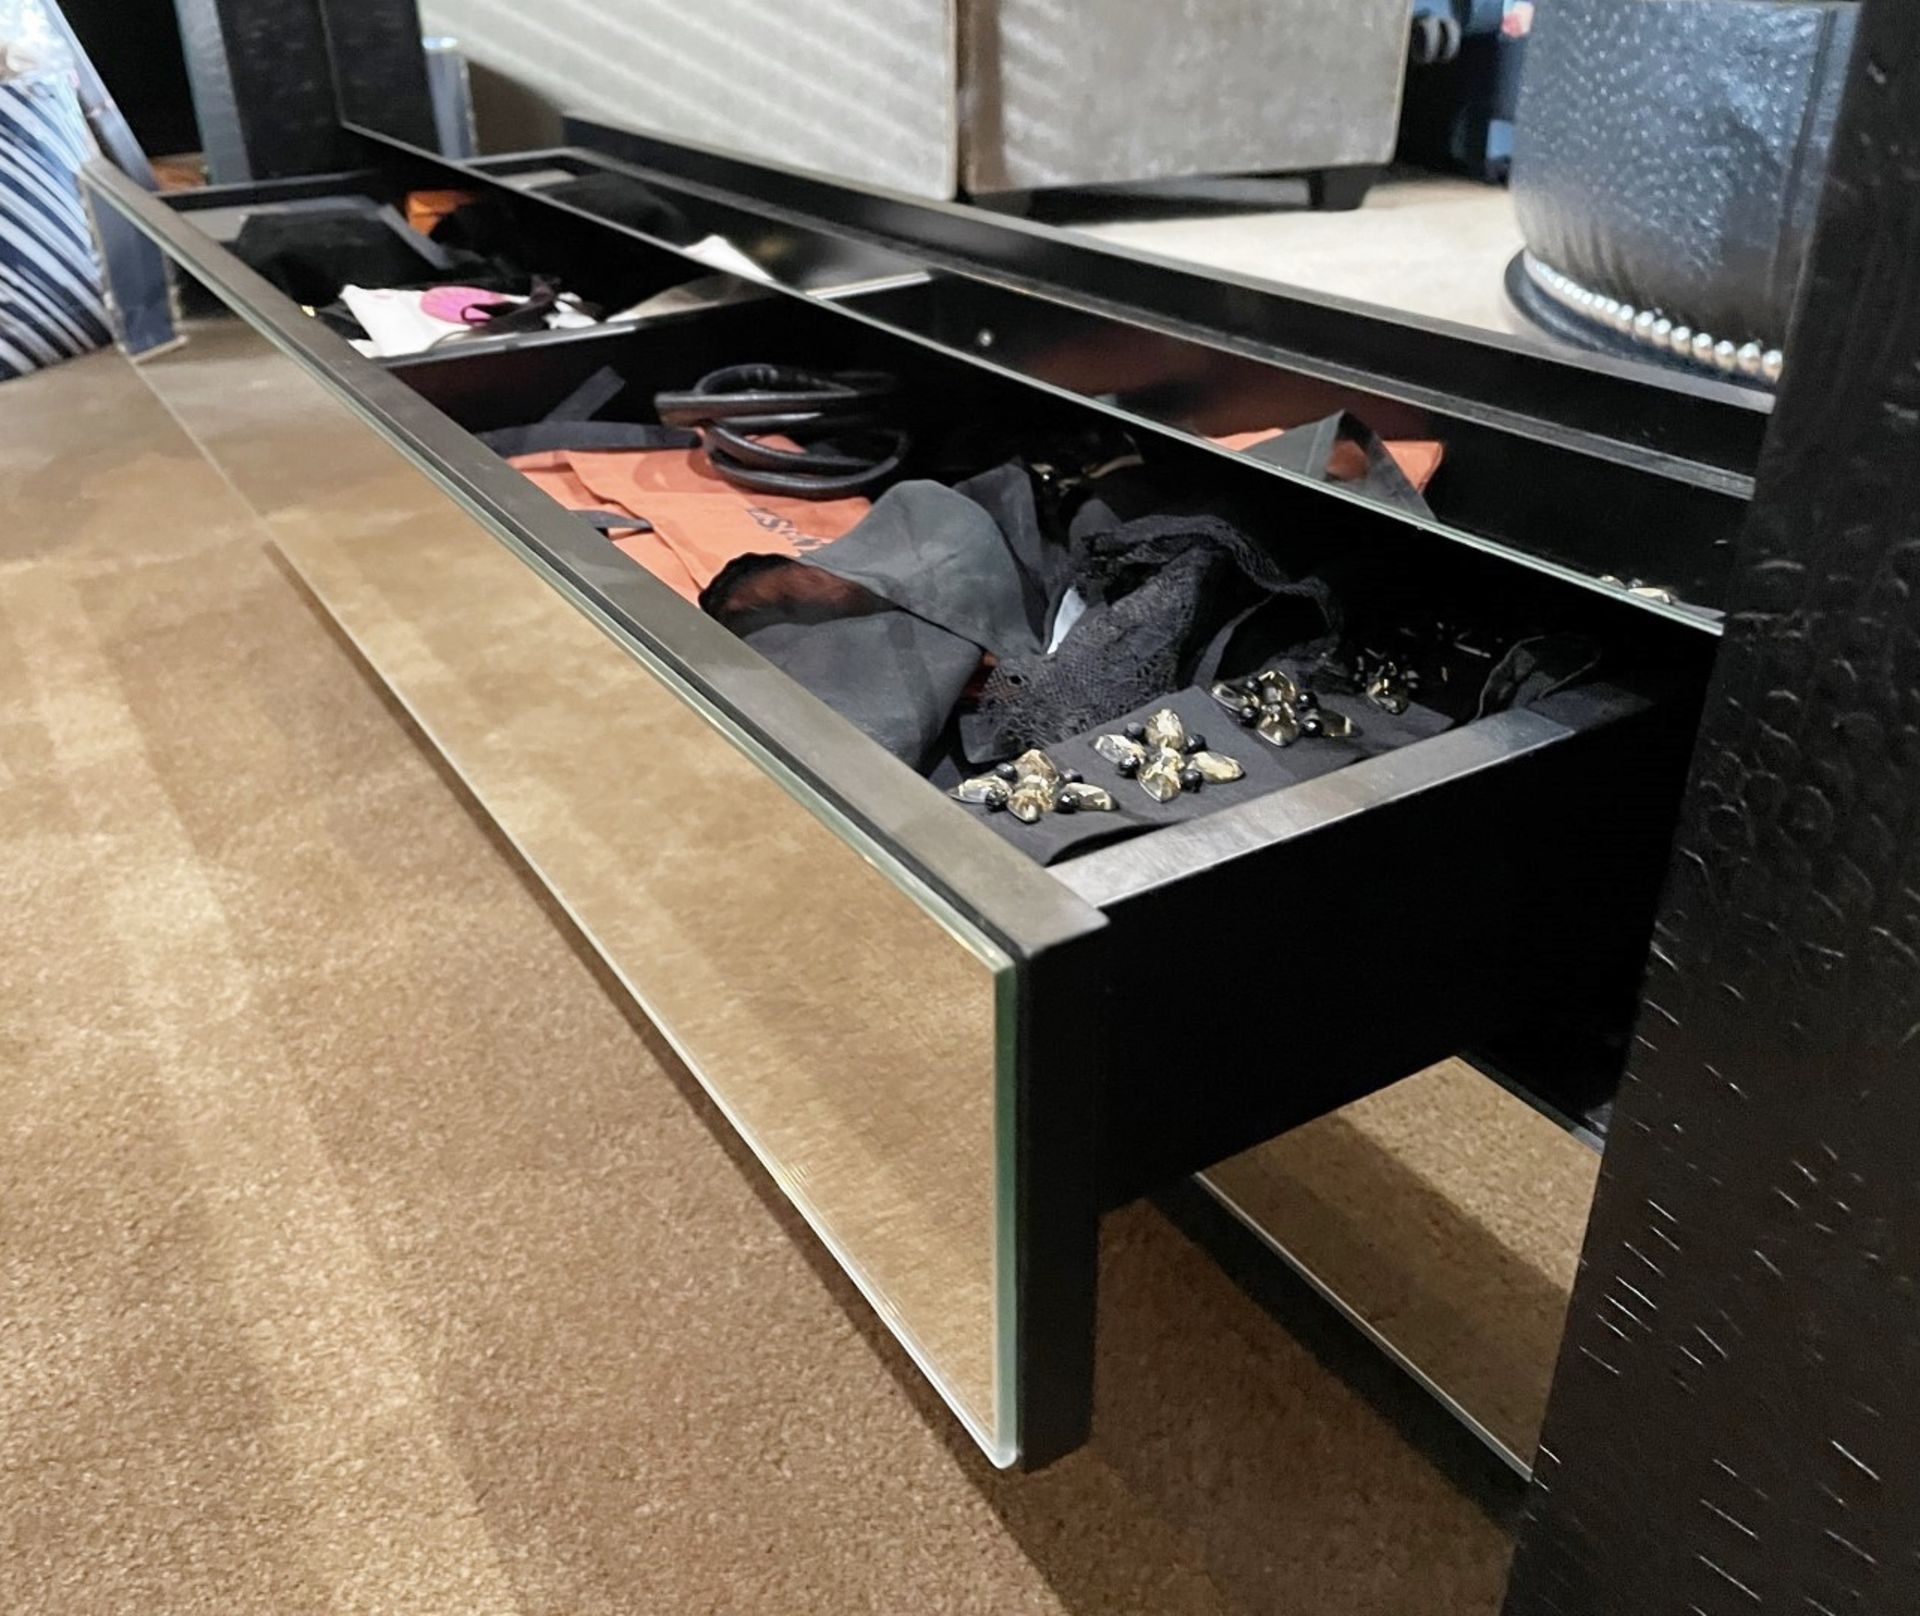 1 x Opulent Crocodile Patterned Leather Storage Cabinet In Black With Mirrored Frontage - Image 12 of 13